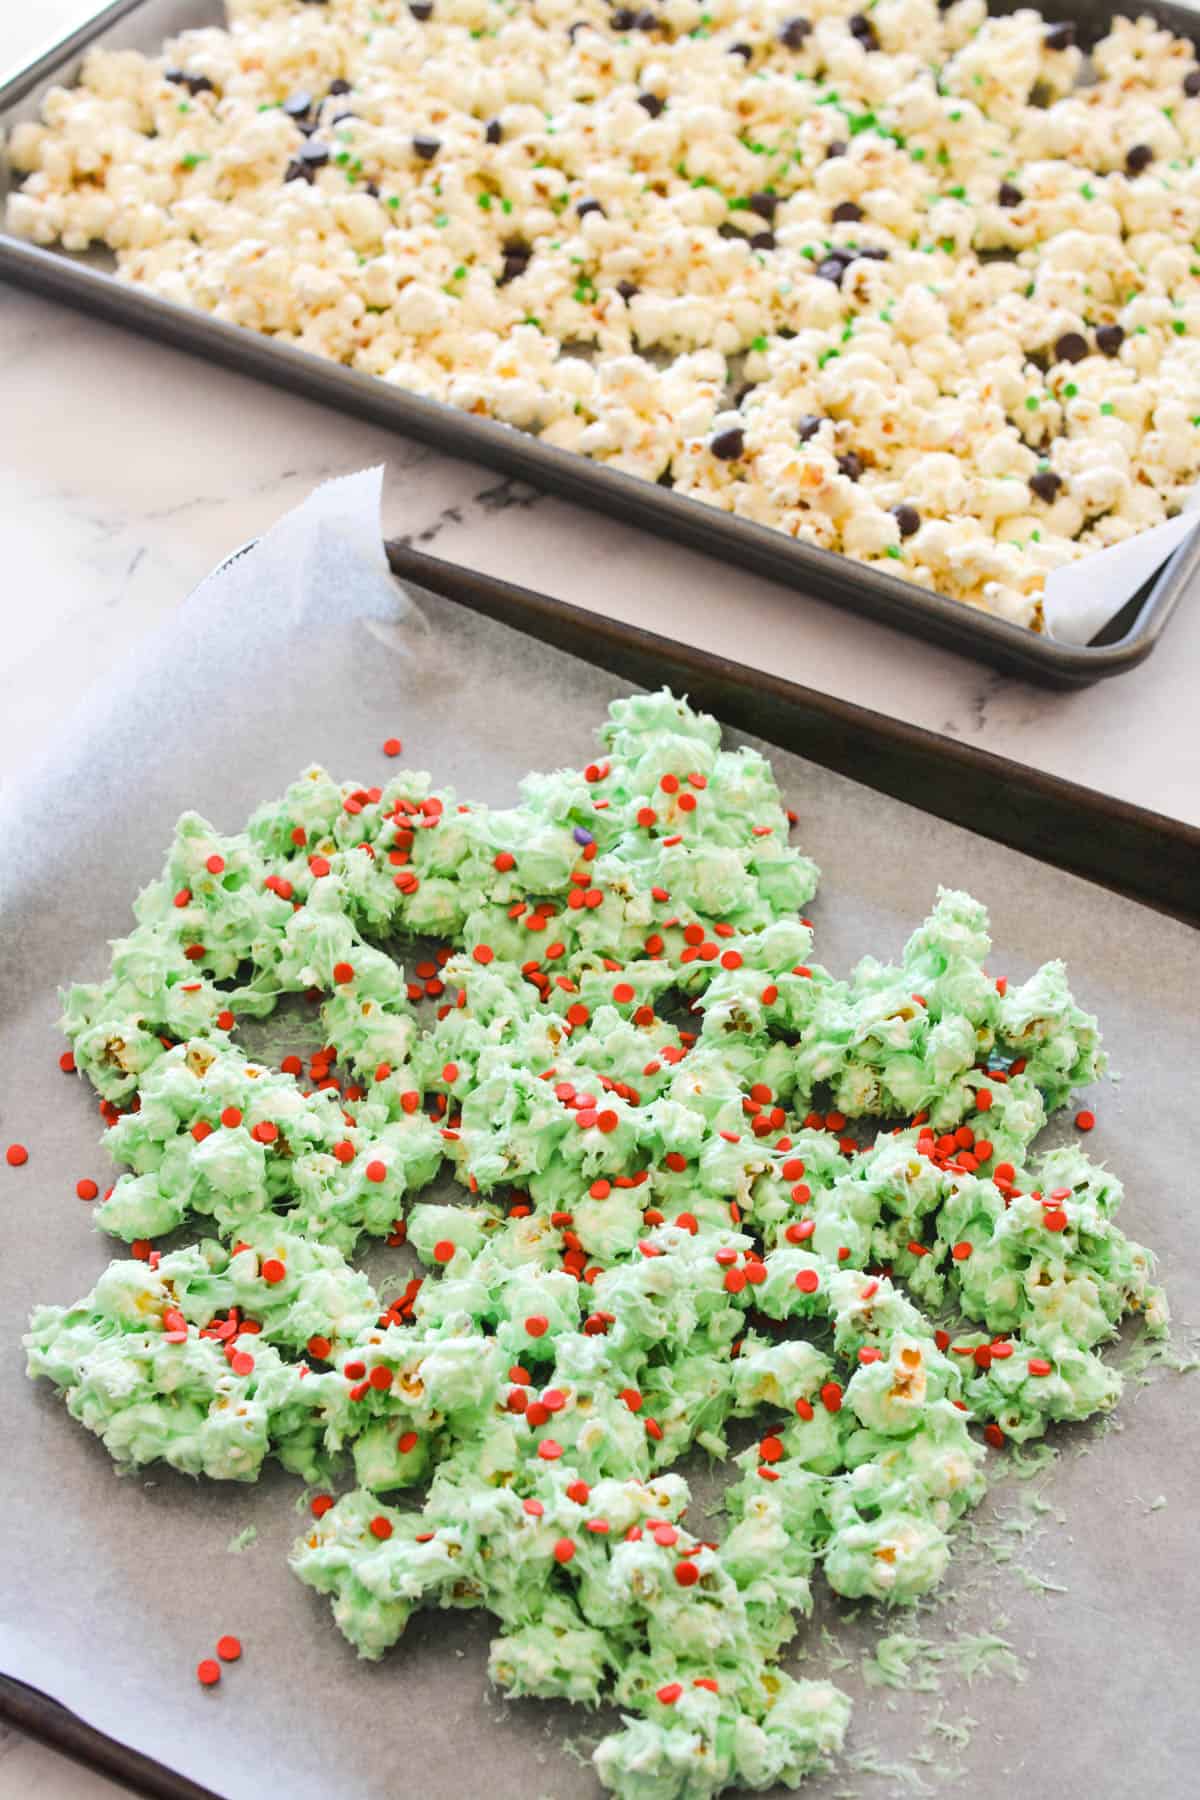 Green colored white chocolate covered popcorn with sprinkles on a baking sheet.